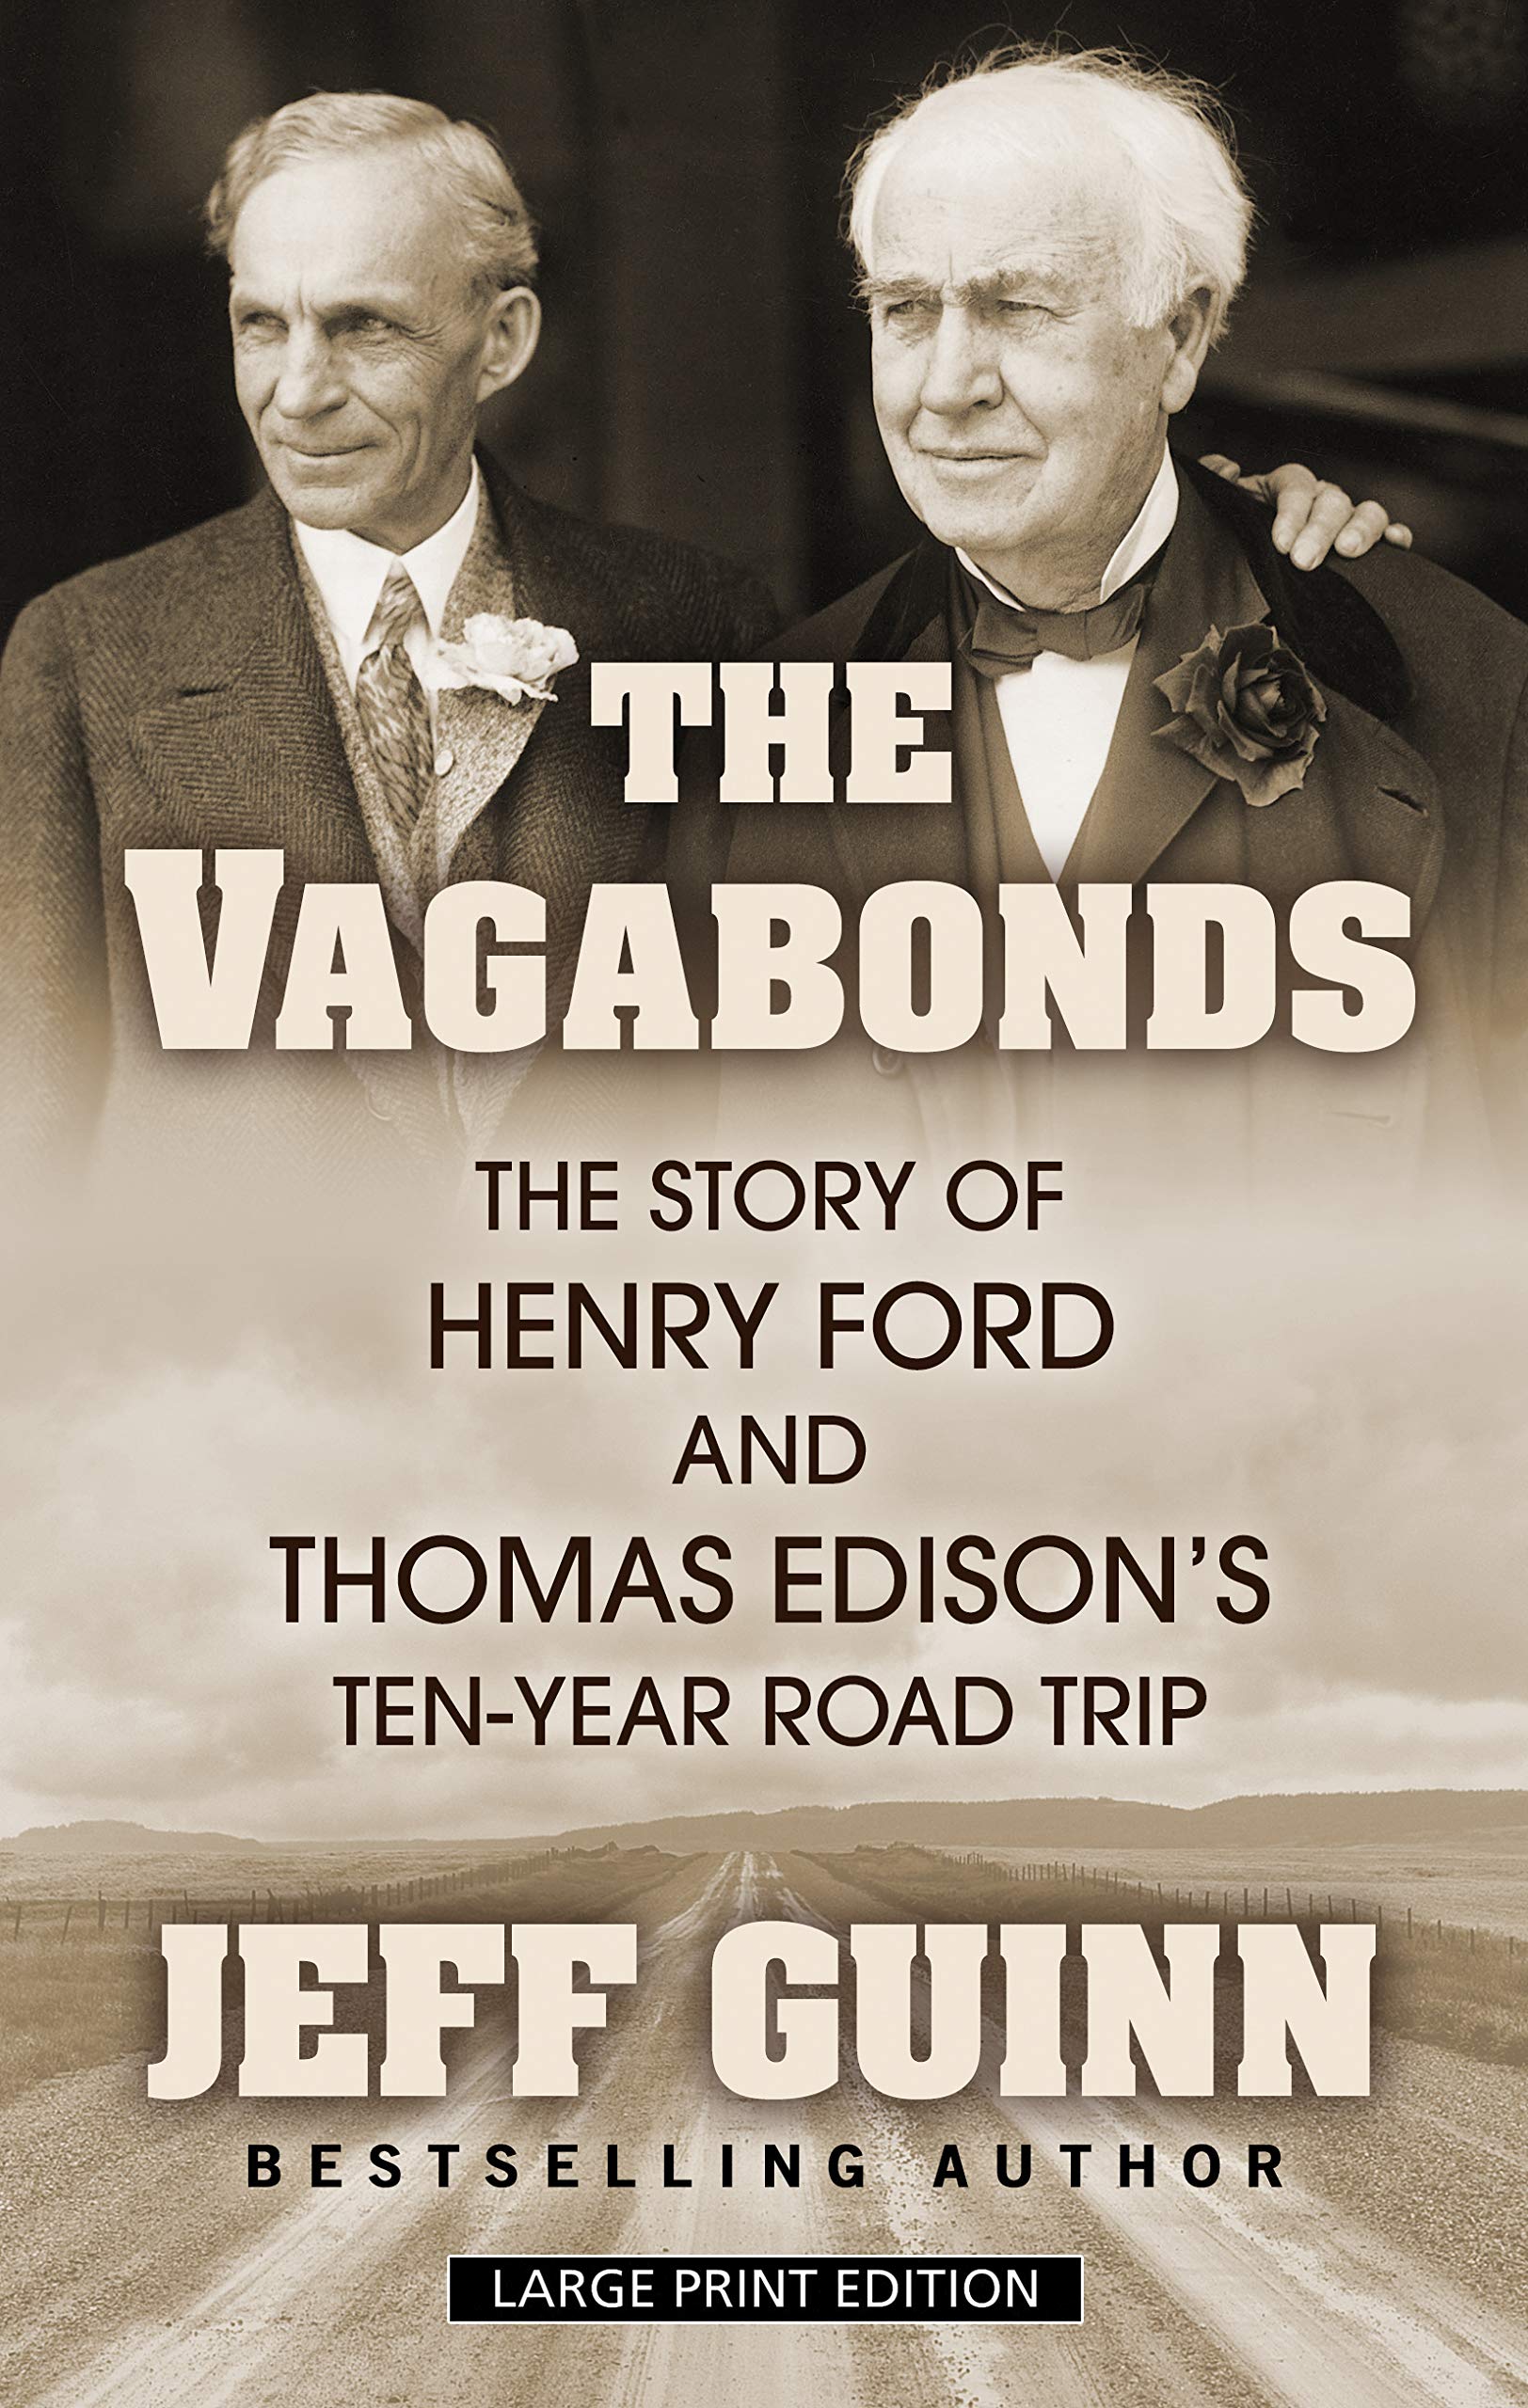 The Vagabonds: The Story of Henry Ford and Thomas Edison's Ten-Year Road Trip (Thorndike Press Large Print Biographies and Memoir)